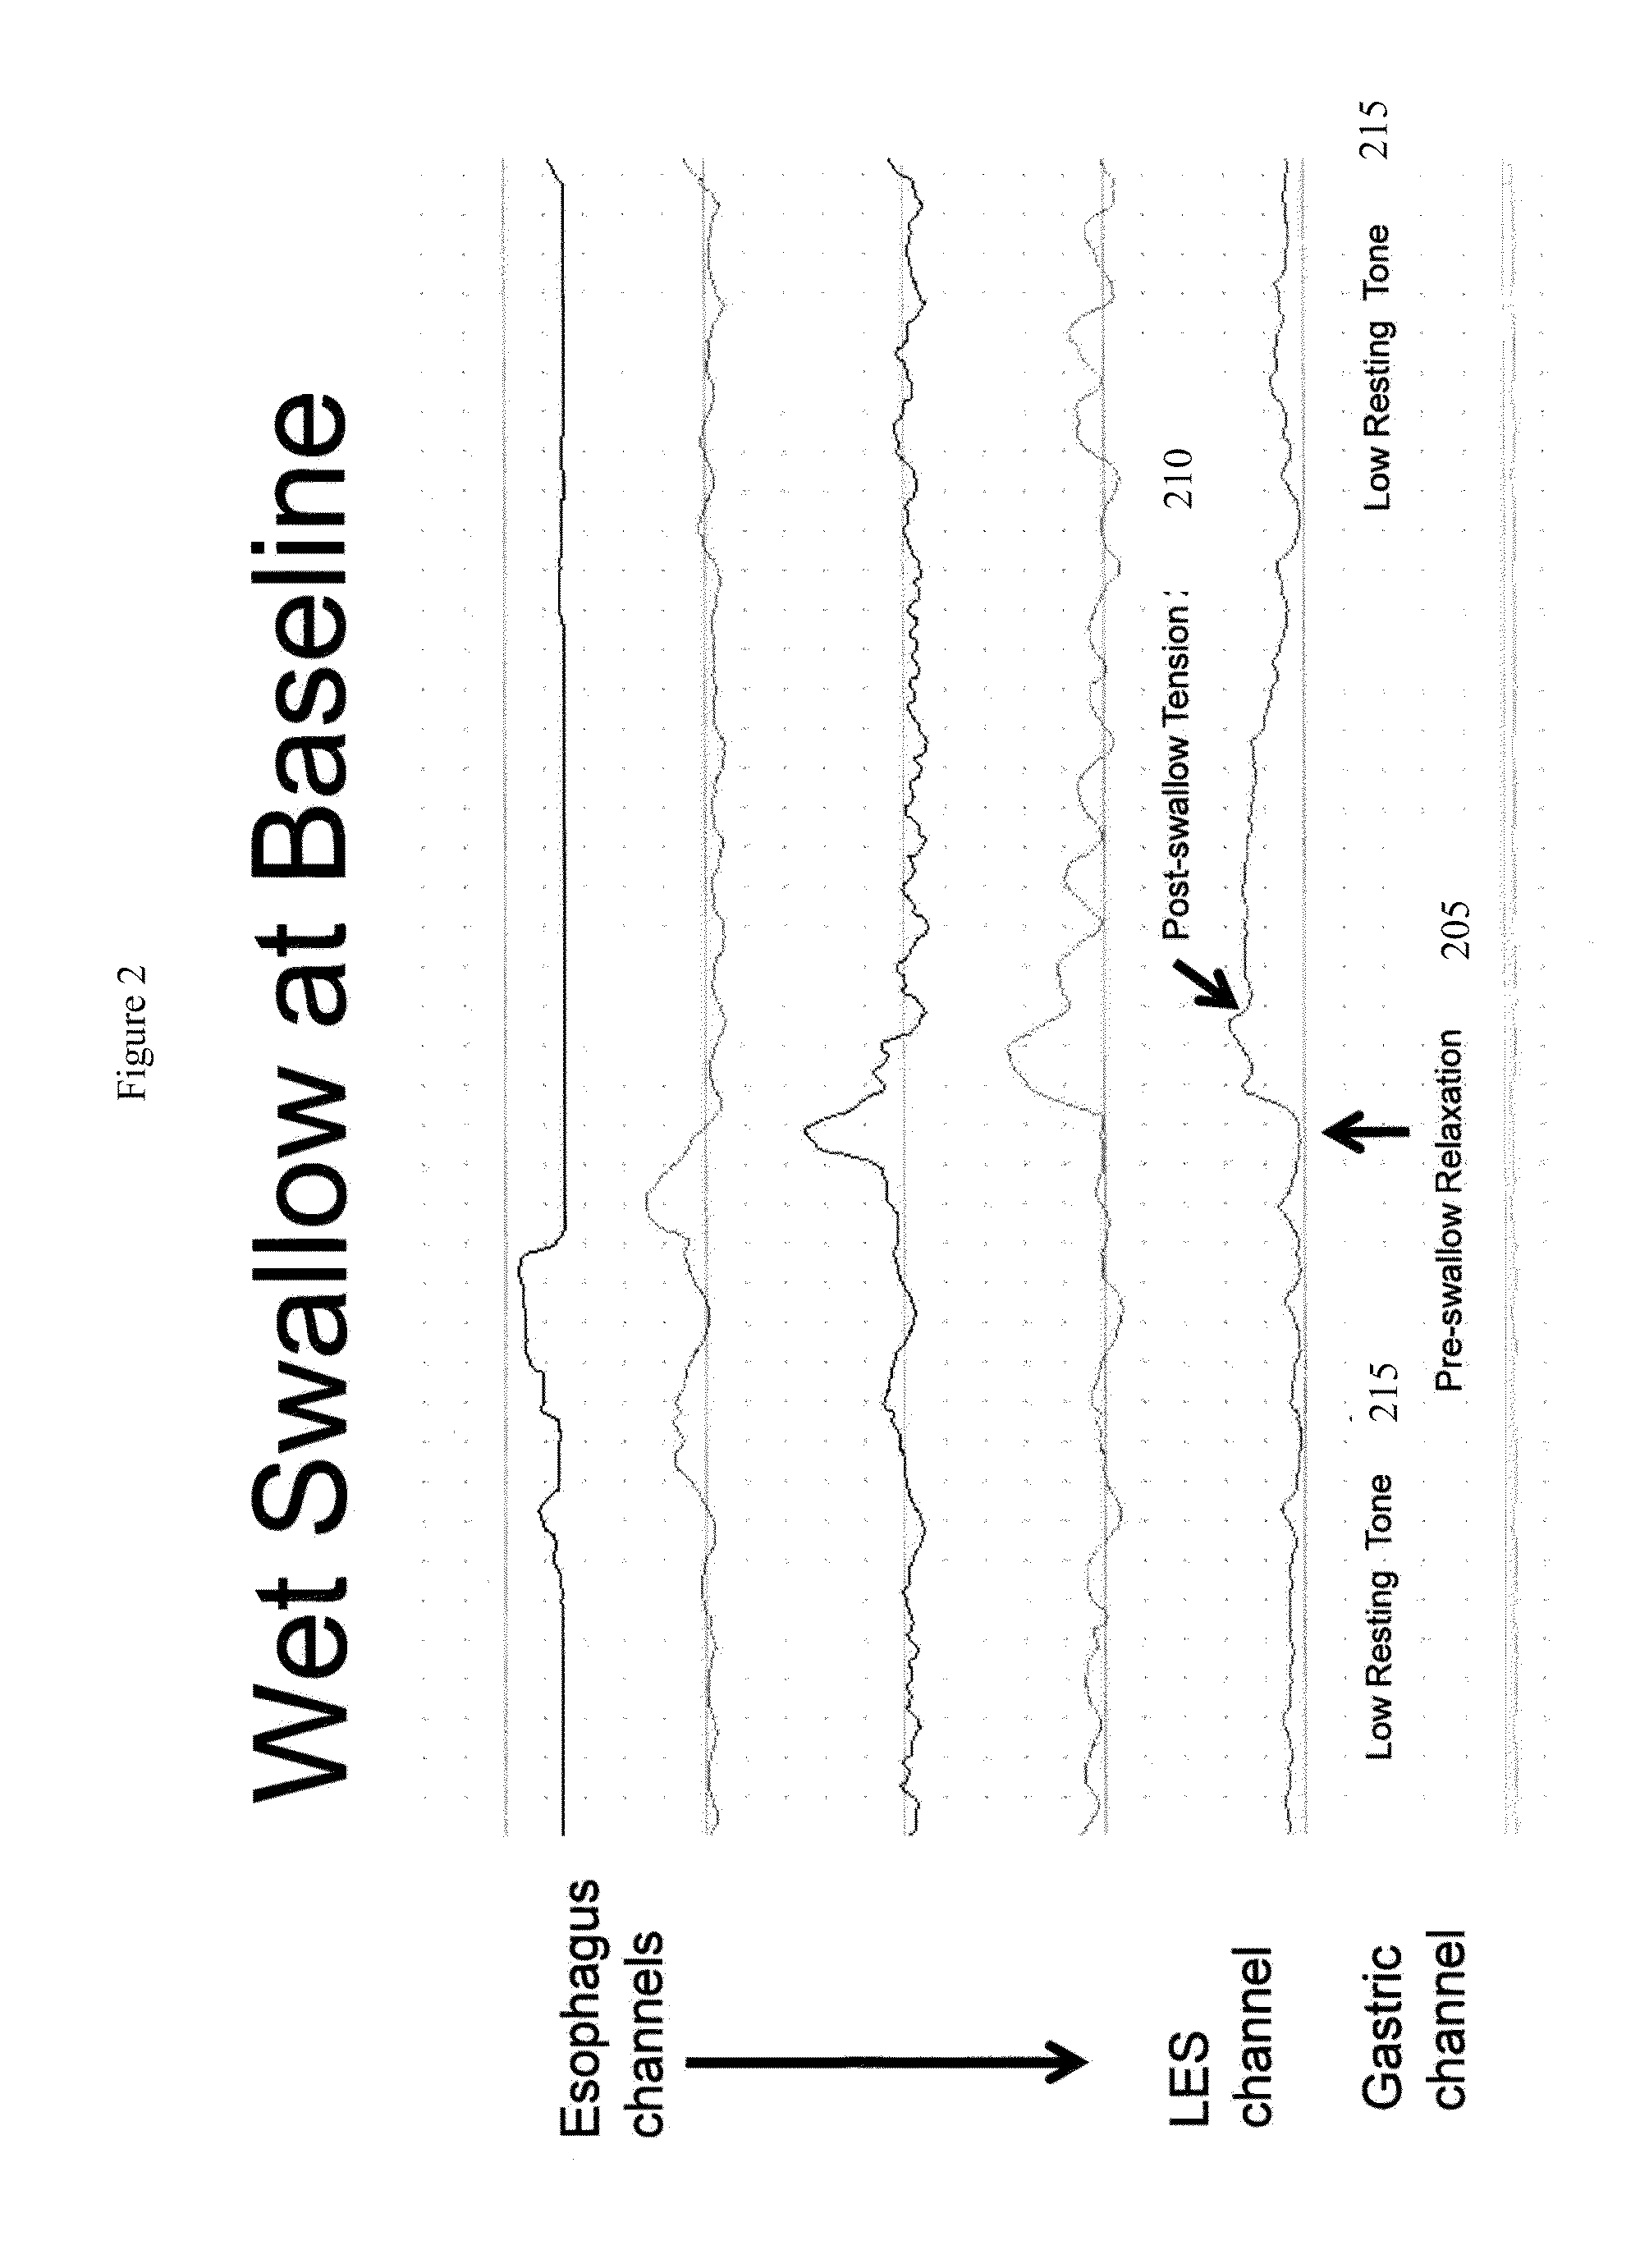 Device and implantation system for electrical stimulation of biological systems